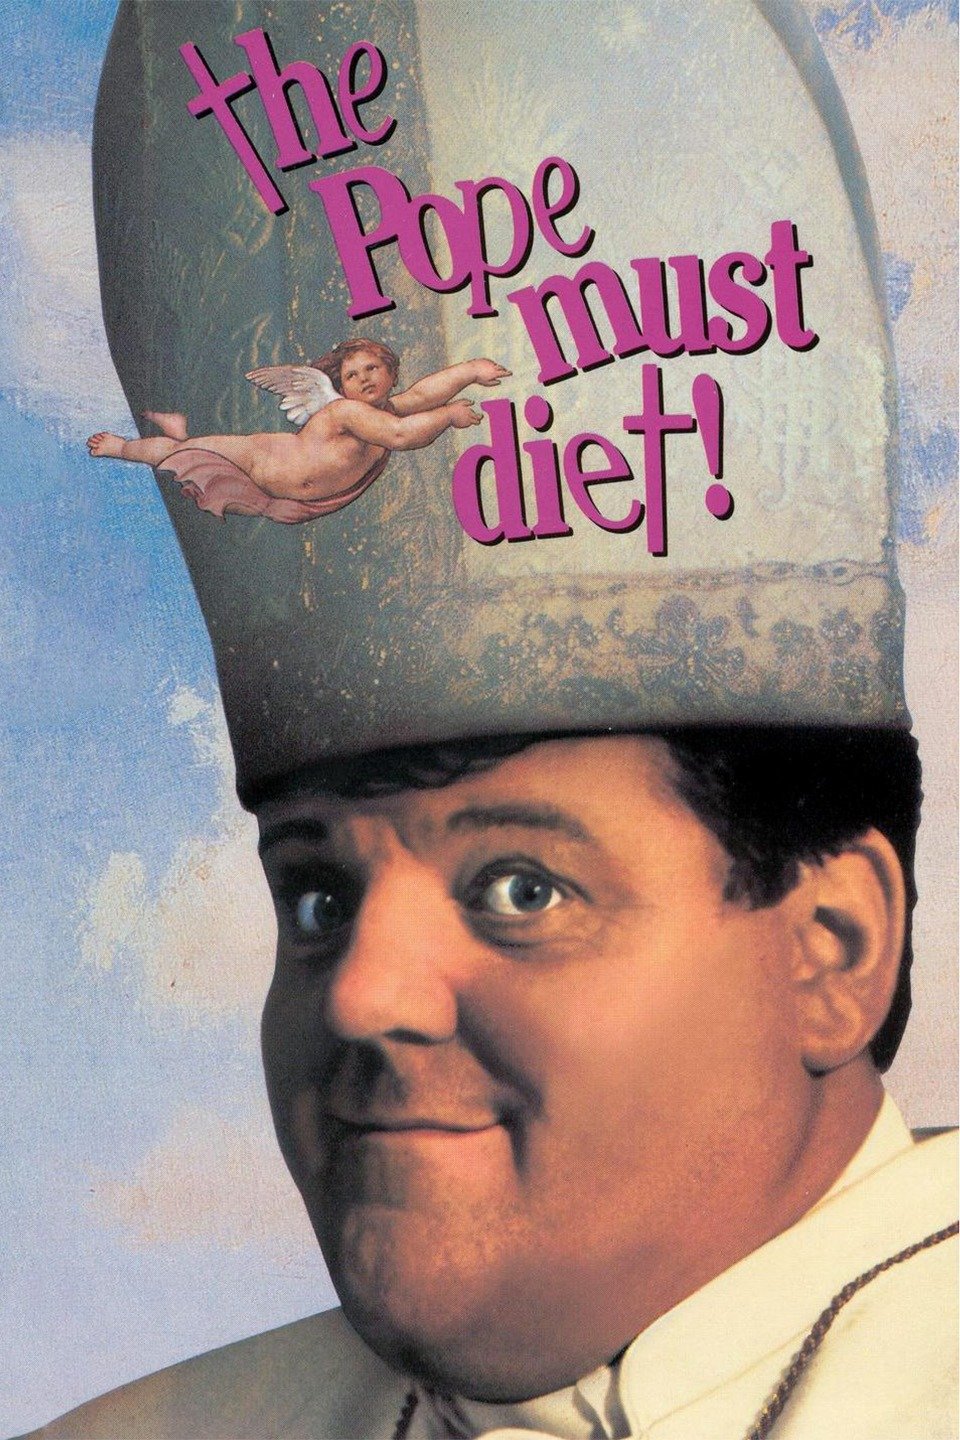 Jo da Let at læse sti The Pope Must Diet - Rotten Tomatoes